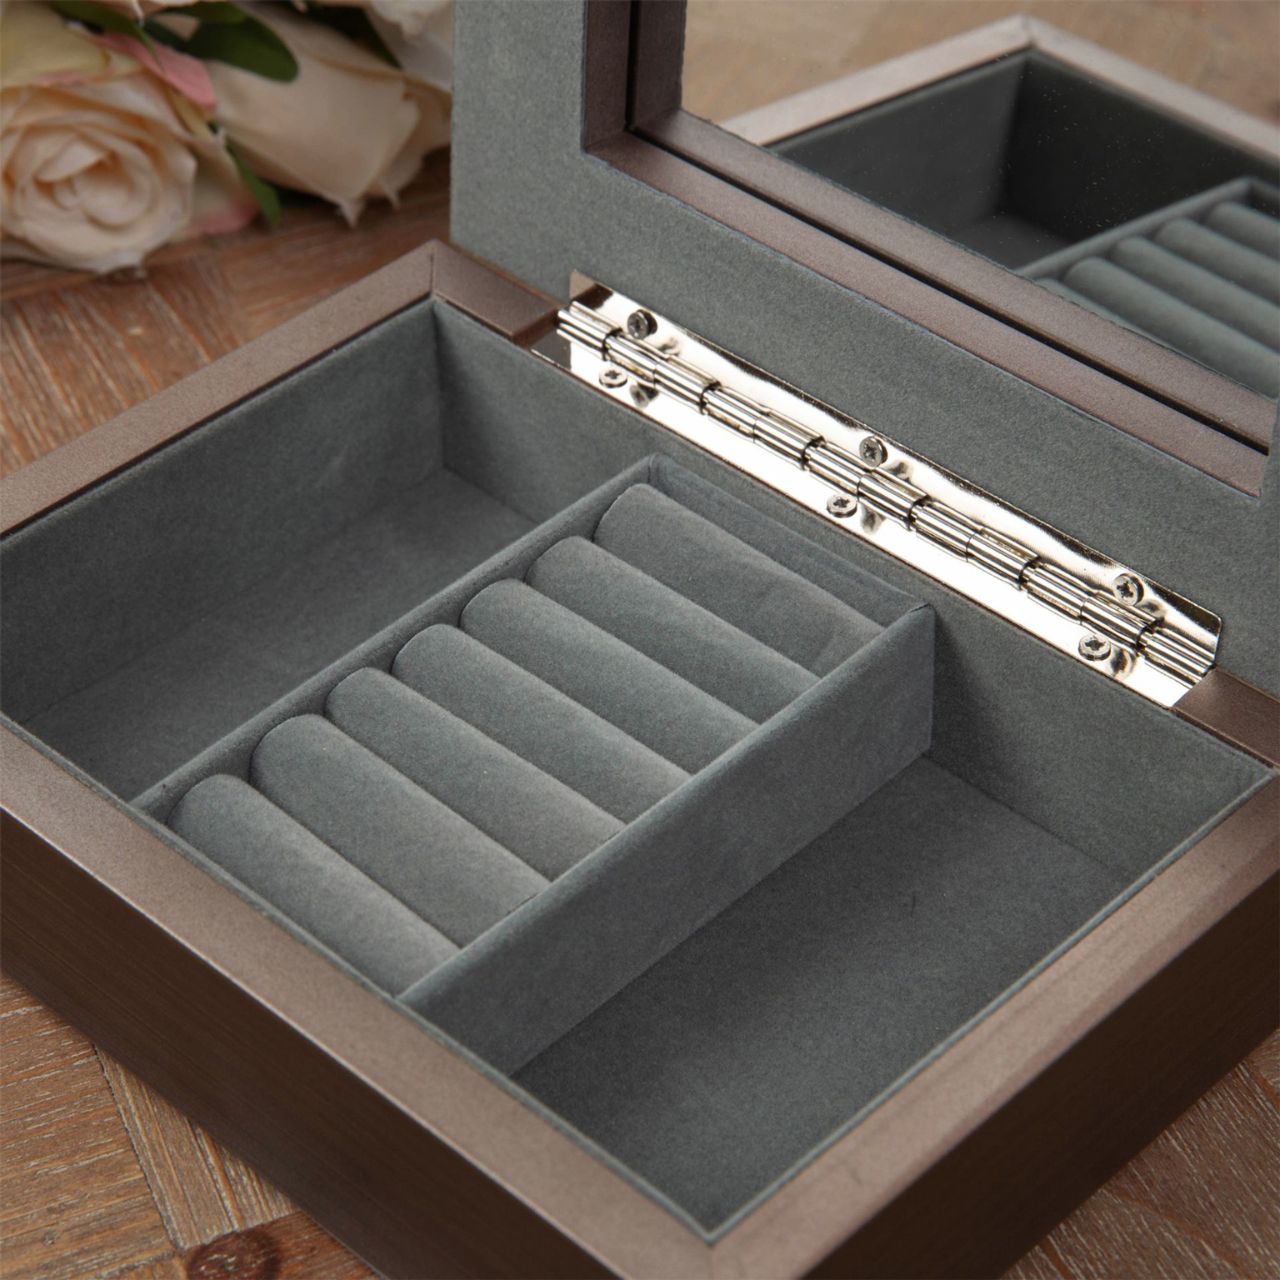 Jewellery Box Brushed Pewter Effect Wooden  A contemporary brushed pewter effect grey wooden jewellery box with an engravable metal lid plate. From SOPHIA® Ladies Gifts - the home of style and sophistication in women's giftware.